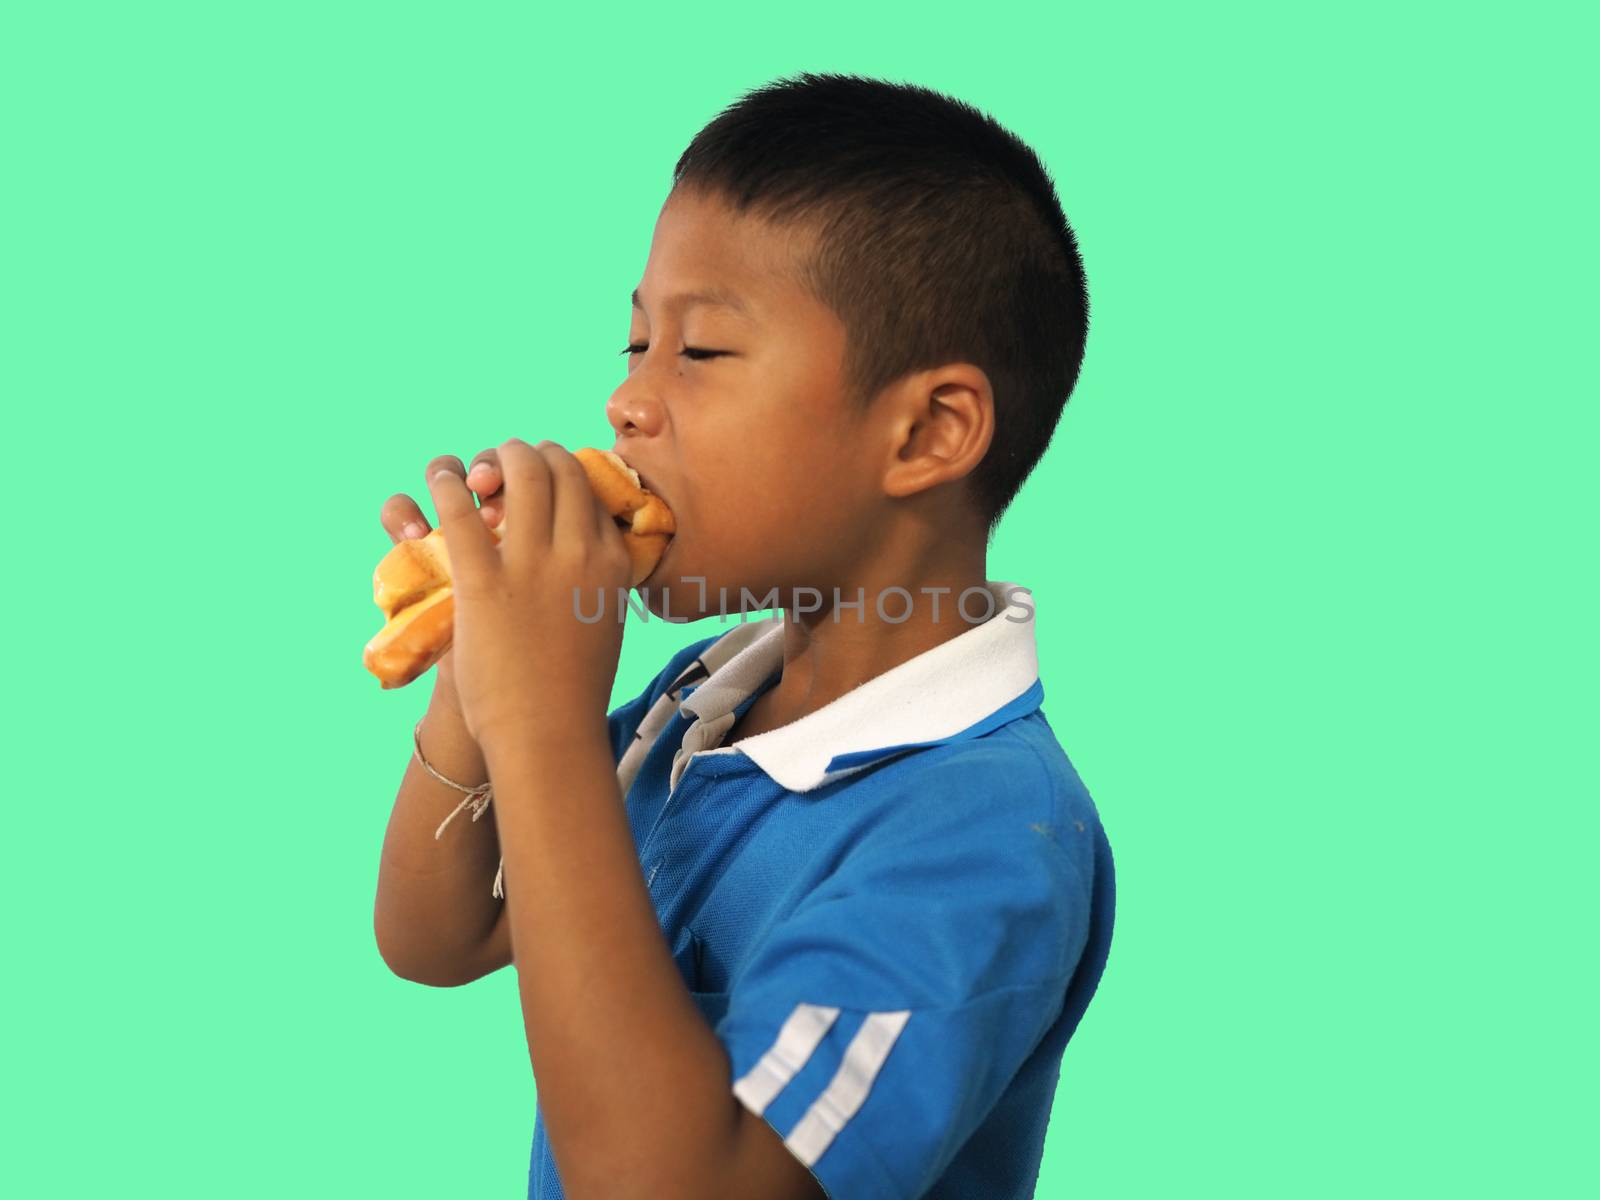 Portrait of a boy eating a hot dog Isolated from on the green ba by Unimages2527